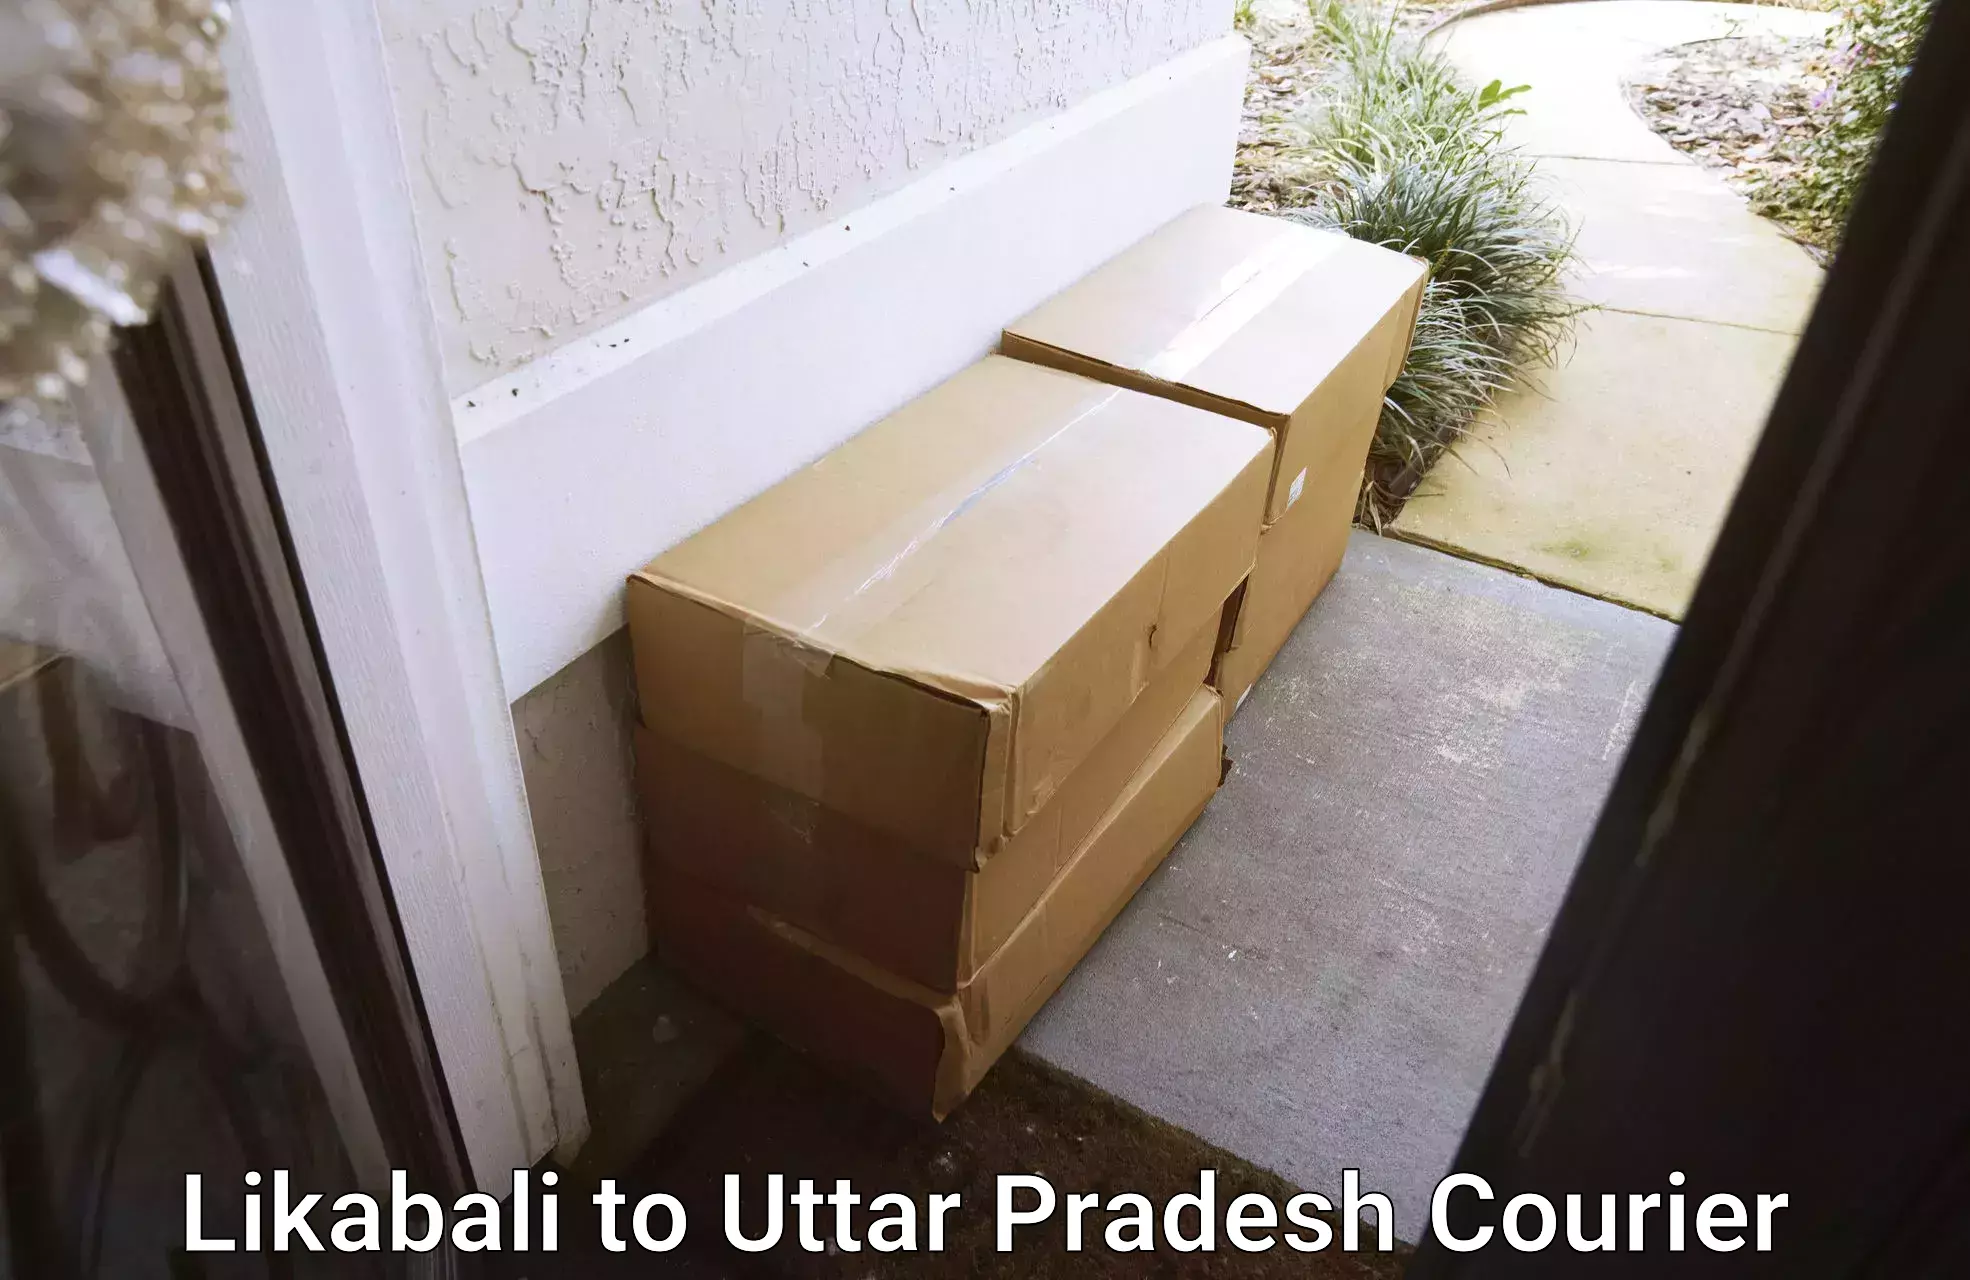 Personal courier services in Likabali to Uttar Pradesh